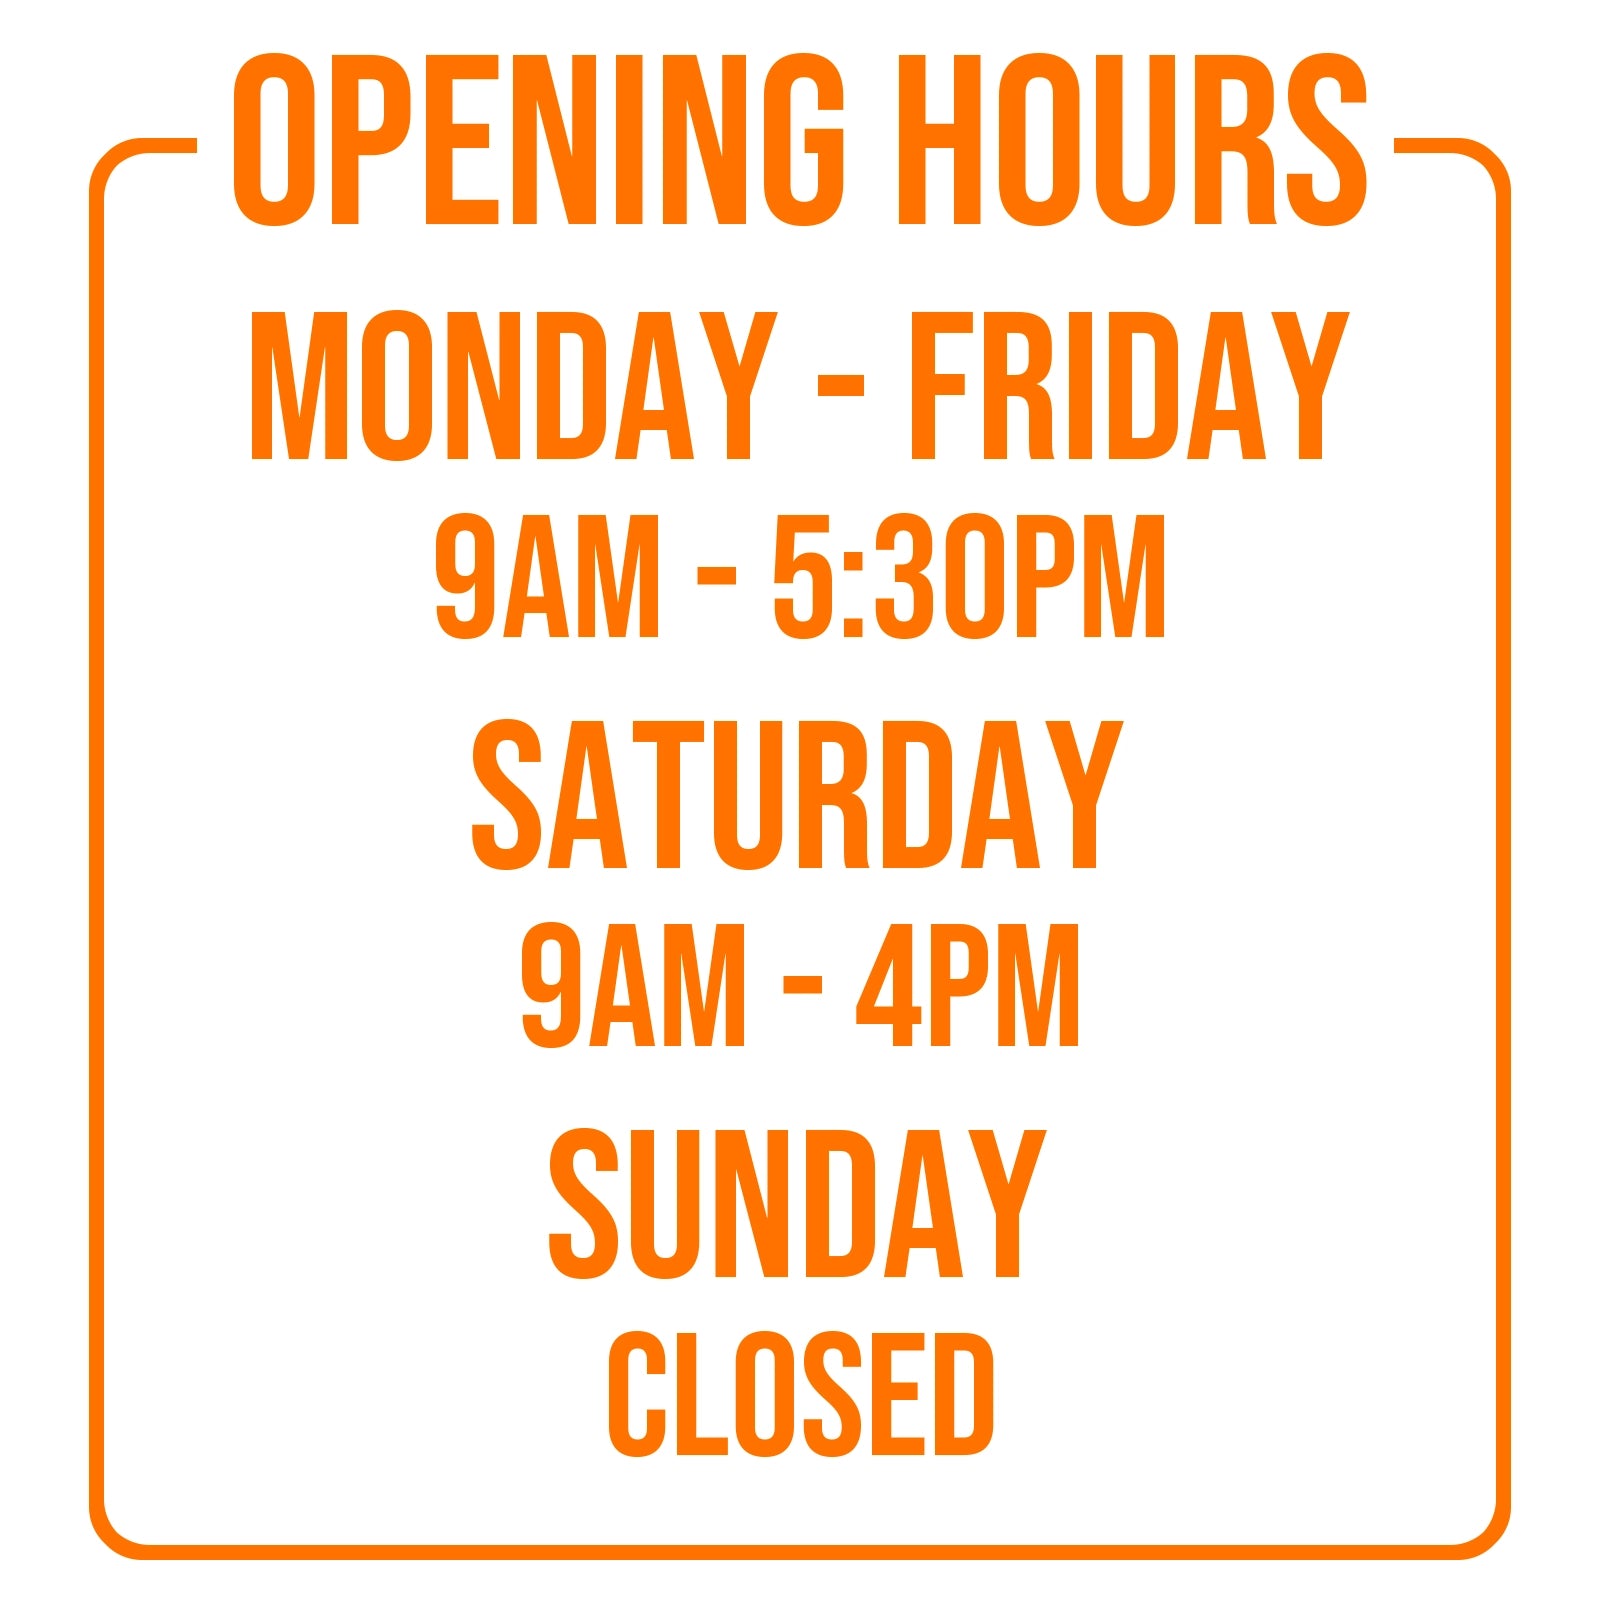 Opening Times for Shop Business Window in Orange